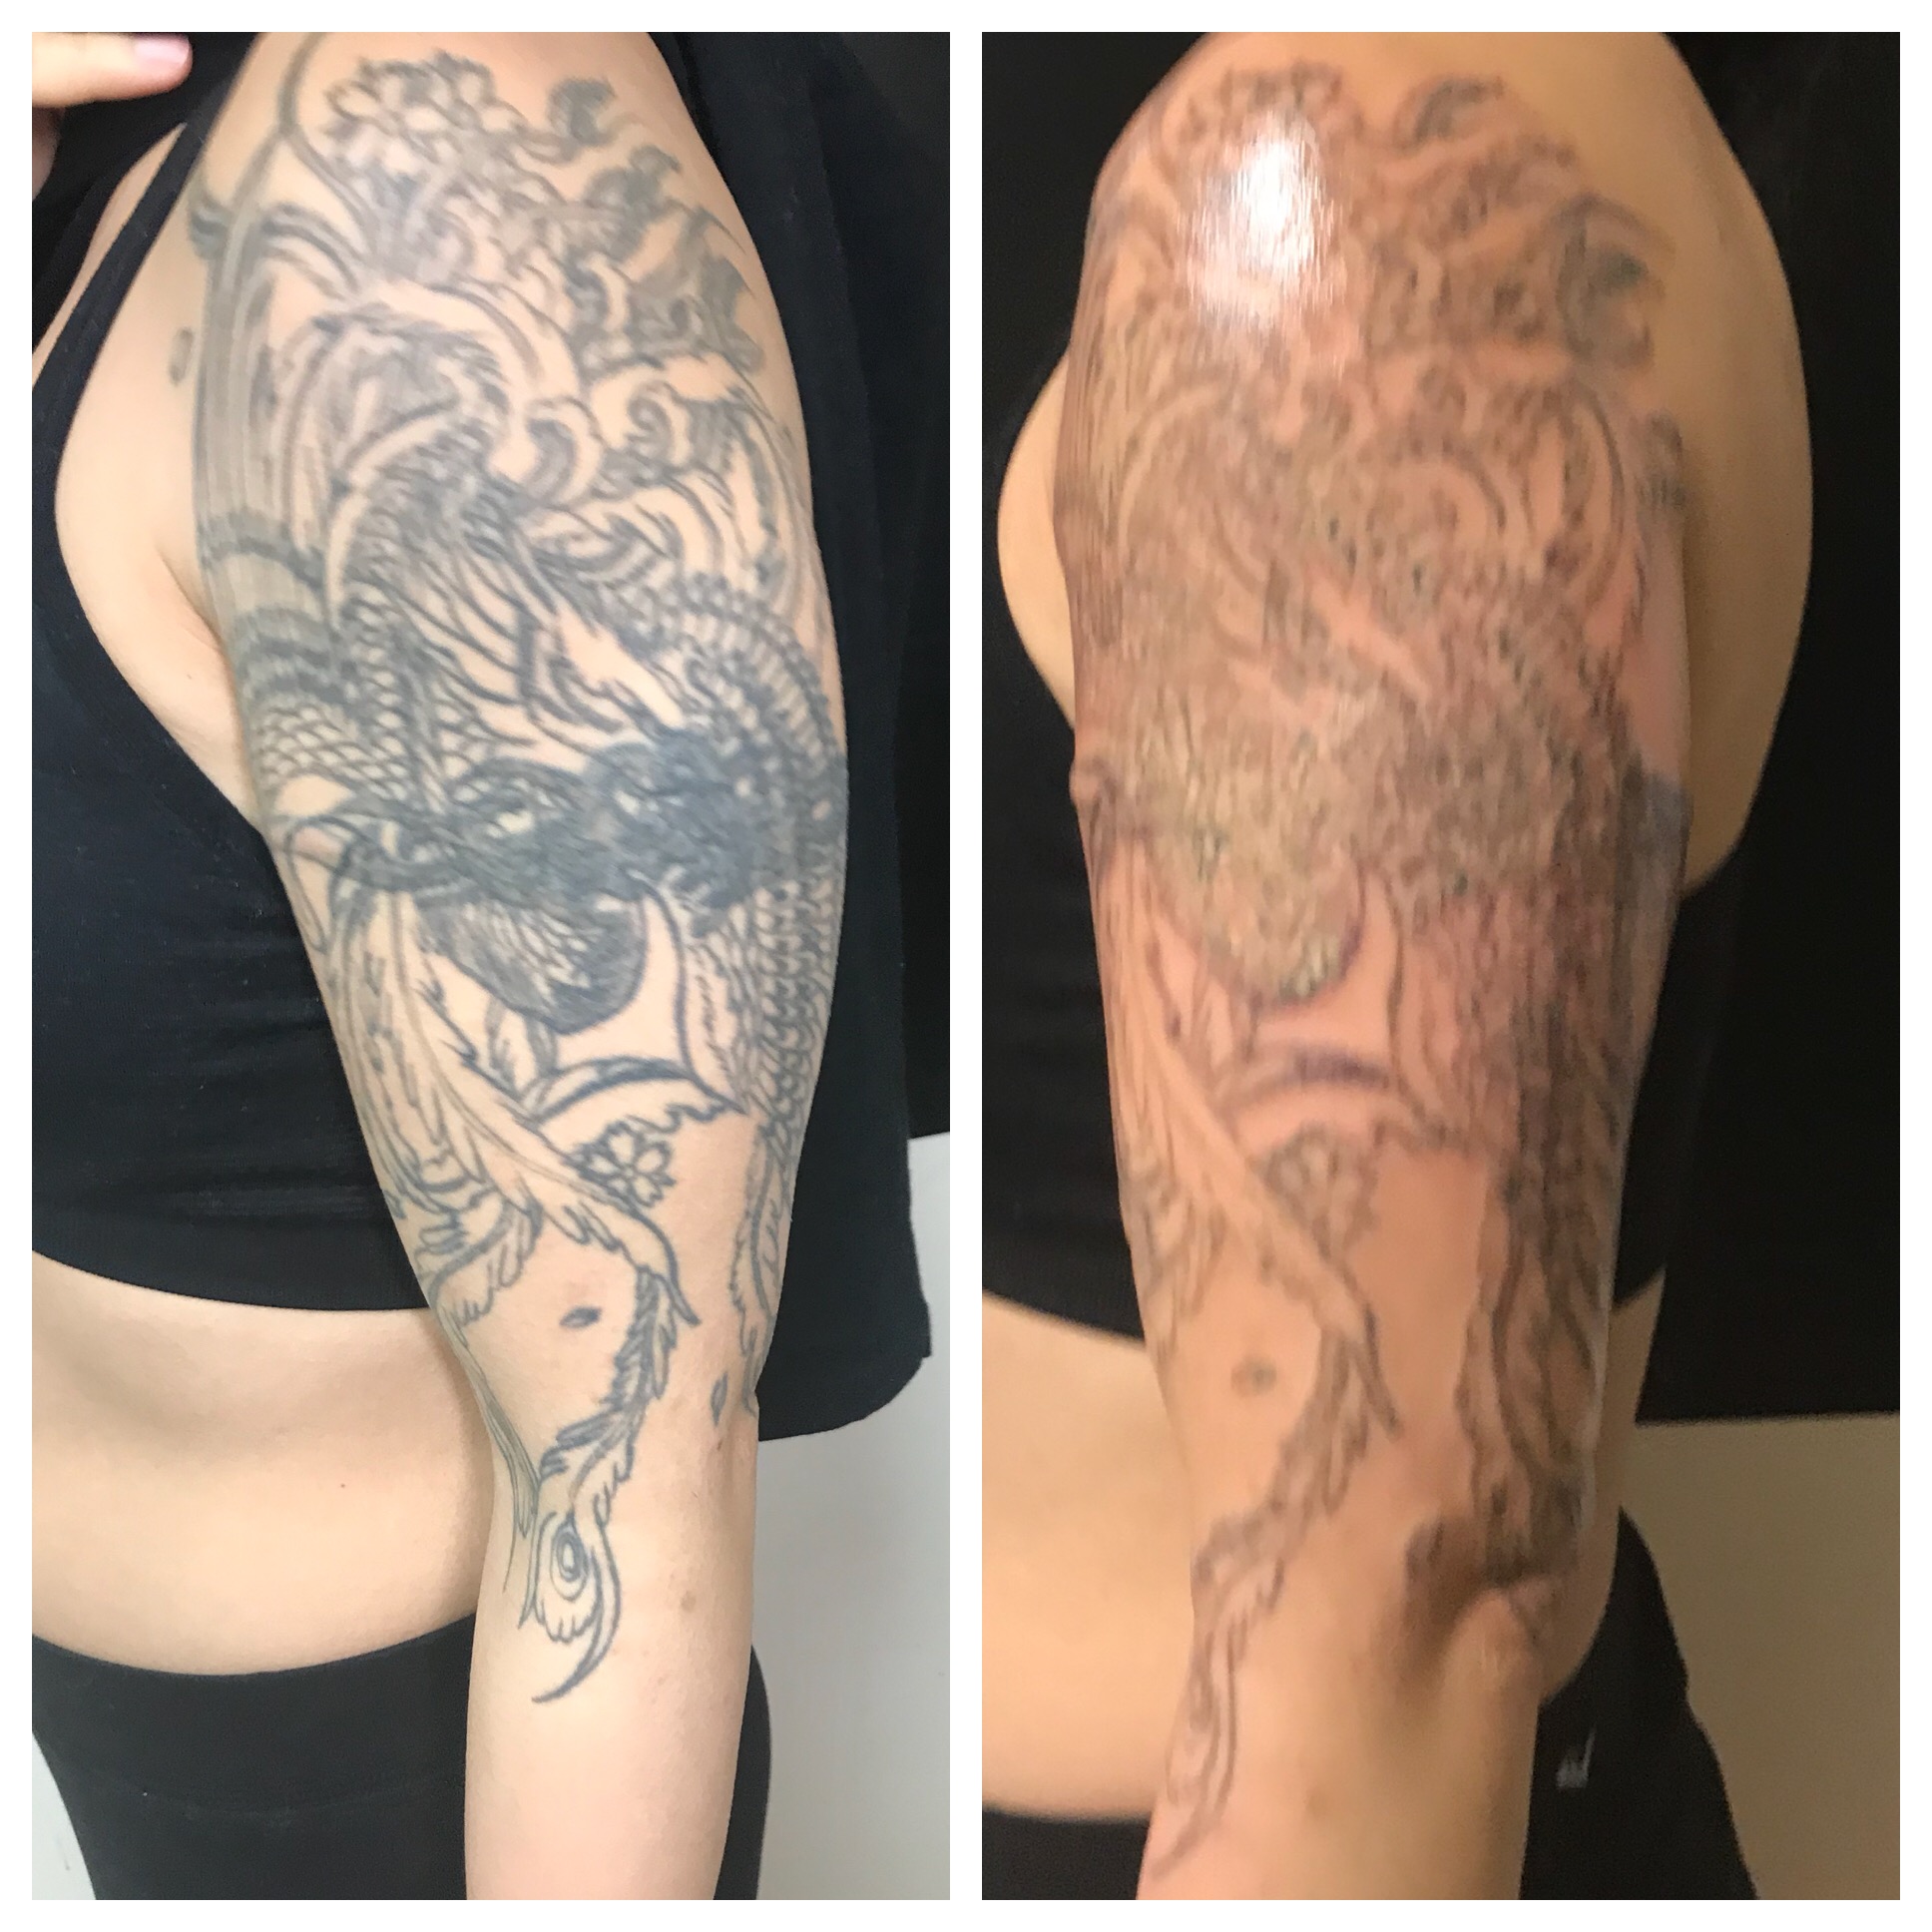 Laser Tattoo Removal Before and After